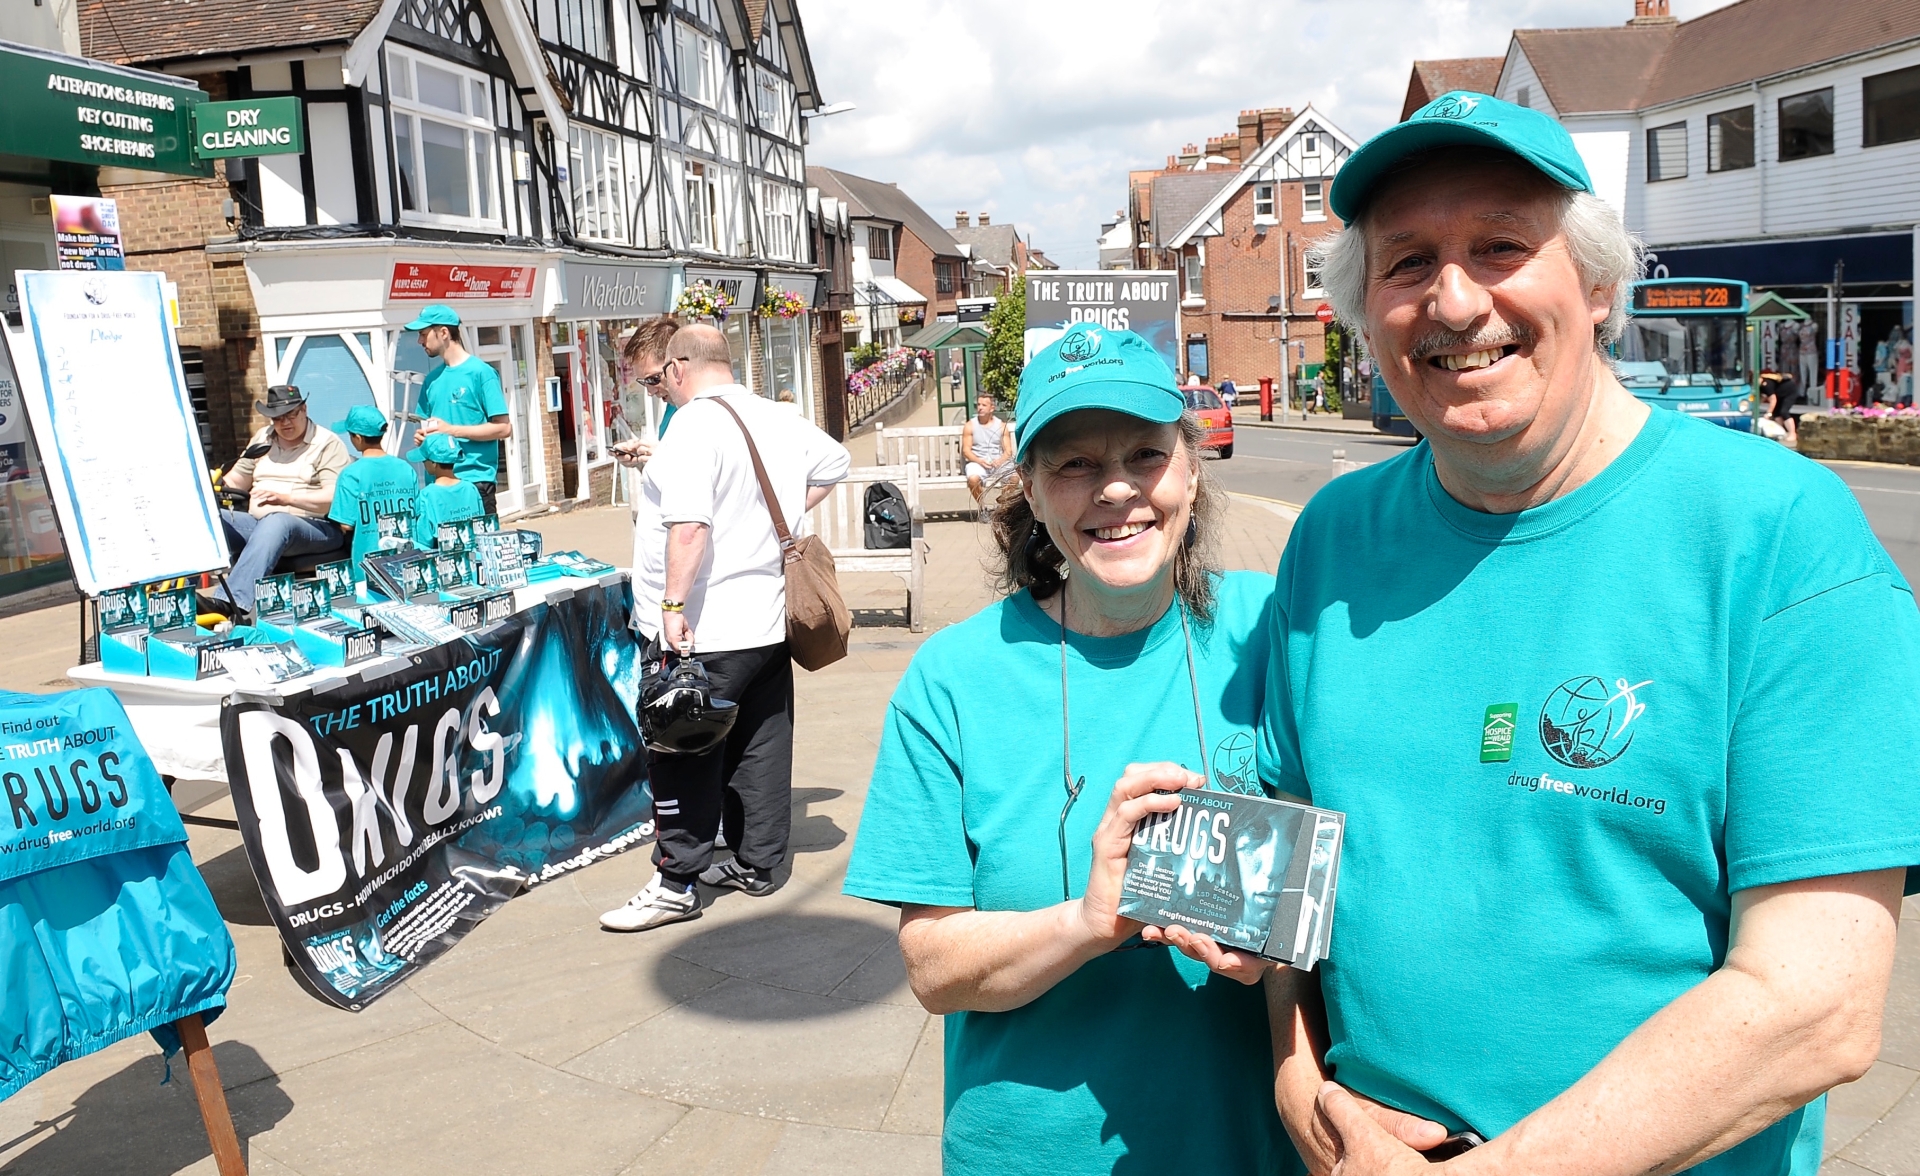 Scientologists set up a drug prevention stall on the High Street in Crowborough.